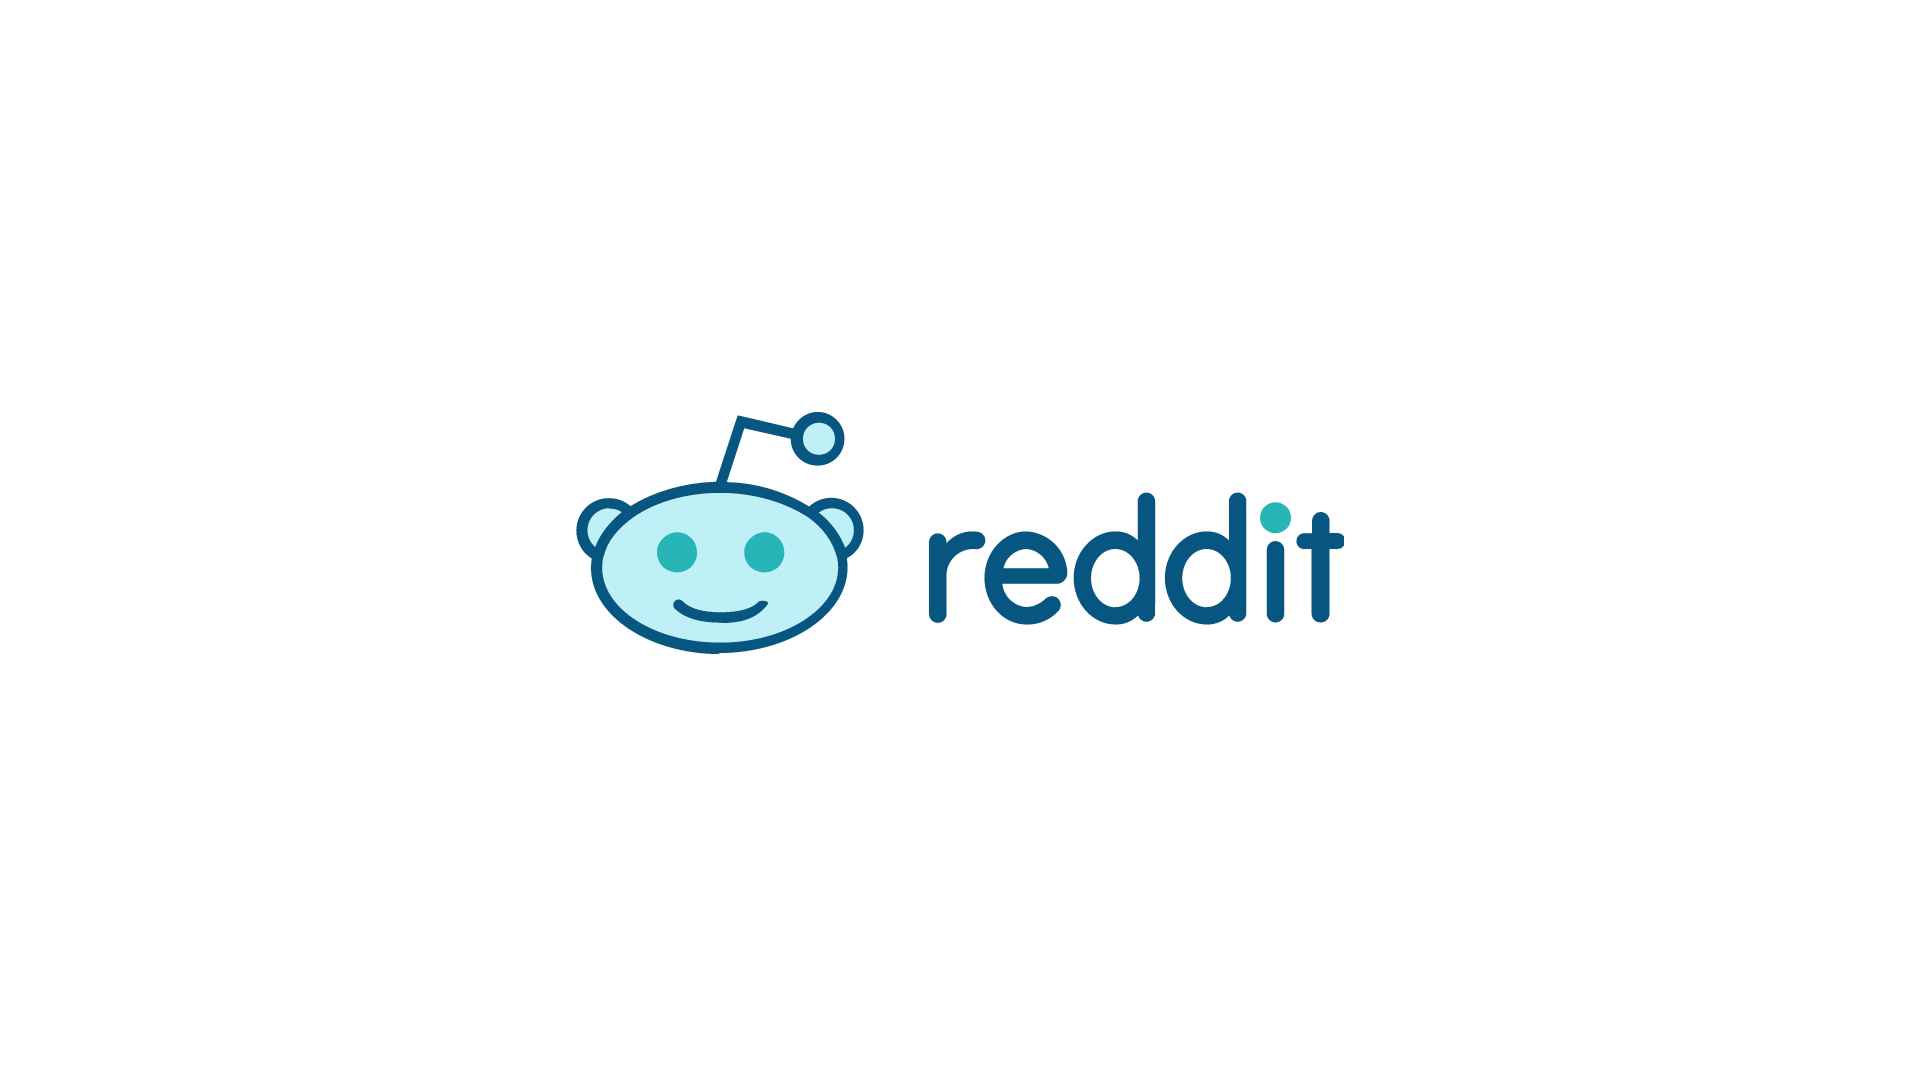 How does Reddit handle controversial or sensitive topics?